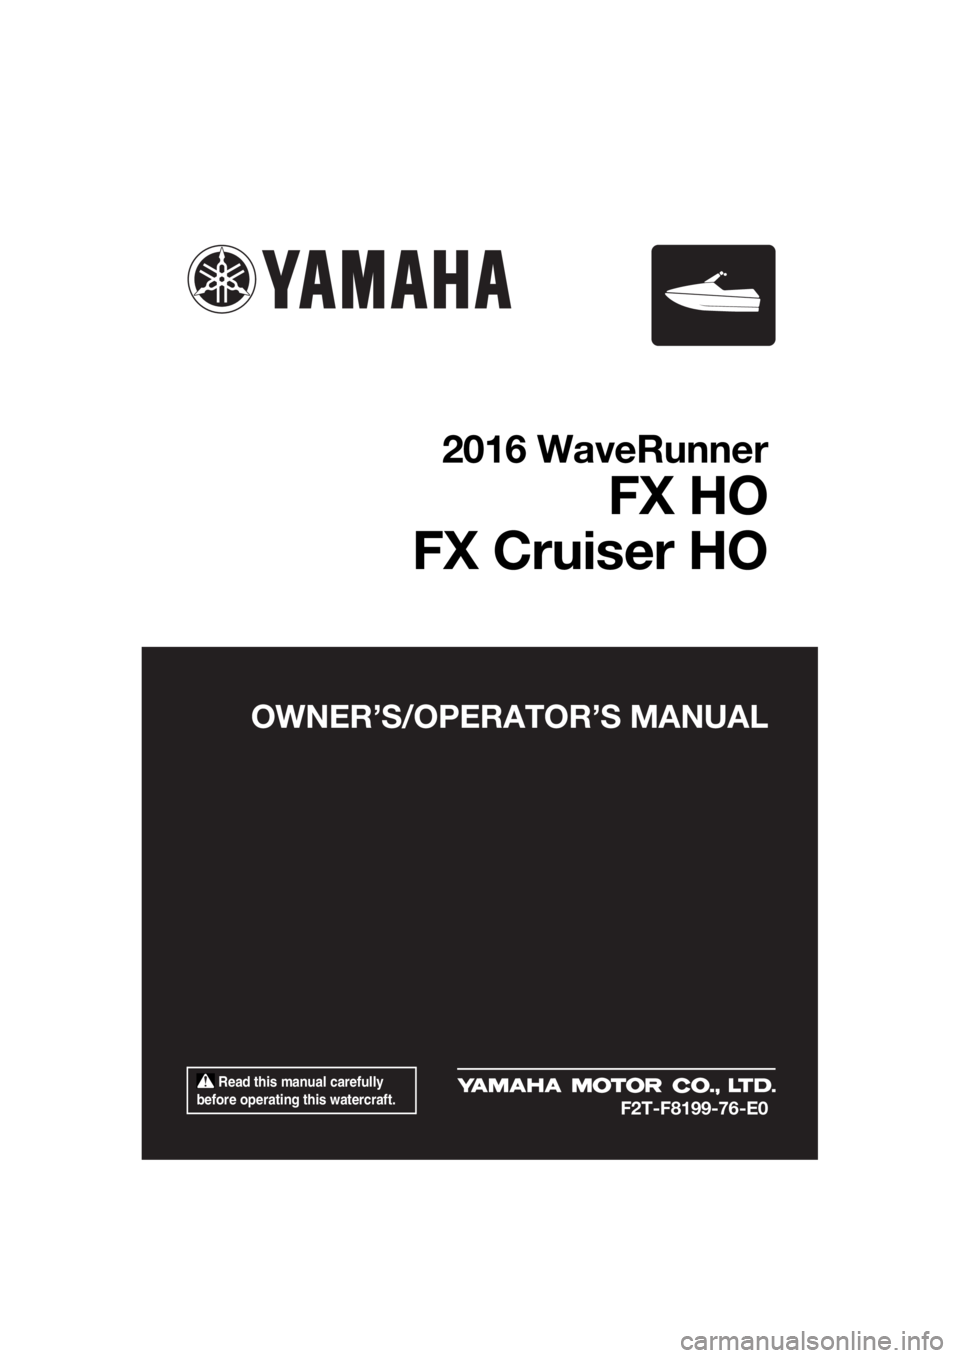 YAMAHA FX HO CRUISER 2016  Owners Manual  Read this manual carefully 
before operating this watercraft.
OWNER’S/OPERATOR’S MANUAL
2016 WaveRunner
FX HO
FX Cruiser HO
F2T-F8199-76-E0
UF2T76E0.book  Page 1  Wednesday, September 9, 2015  5: